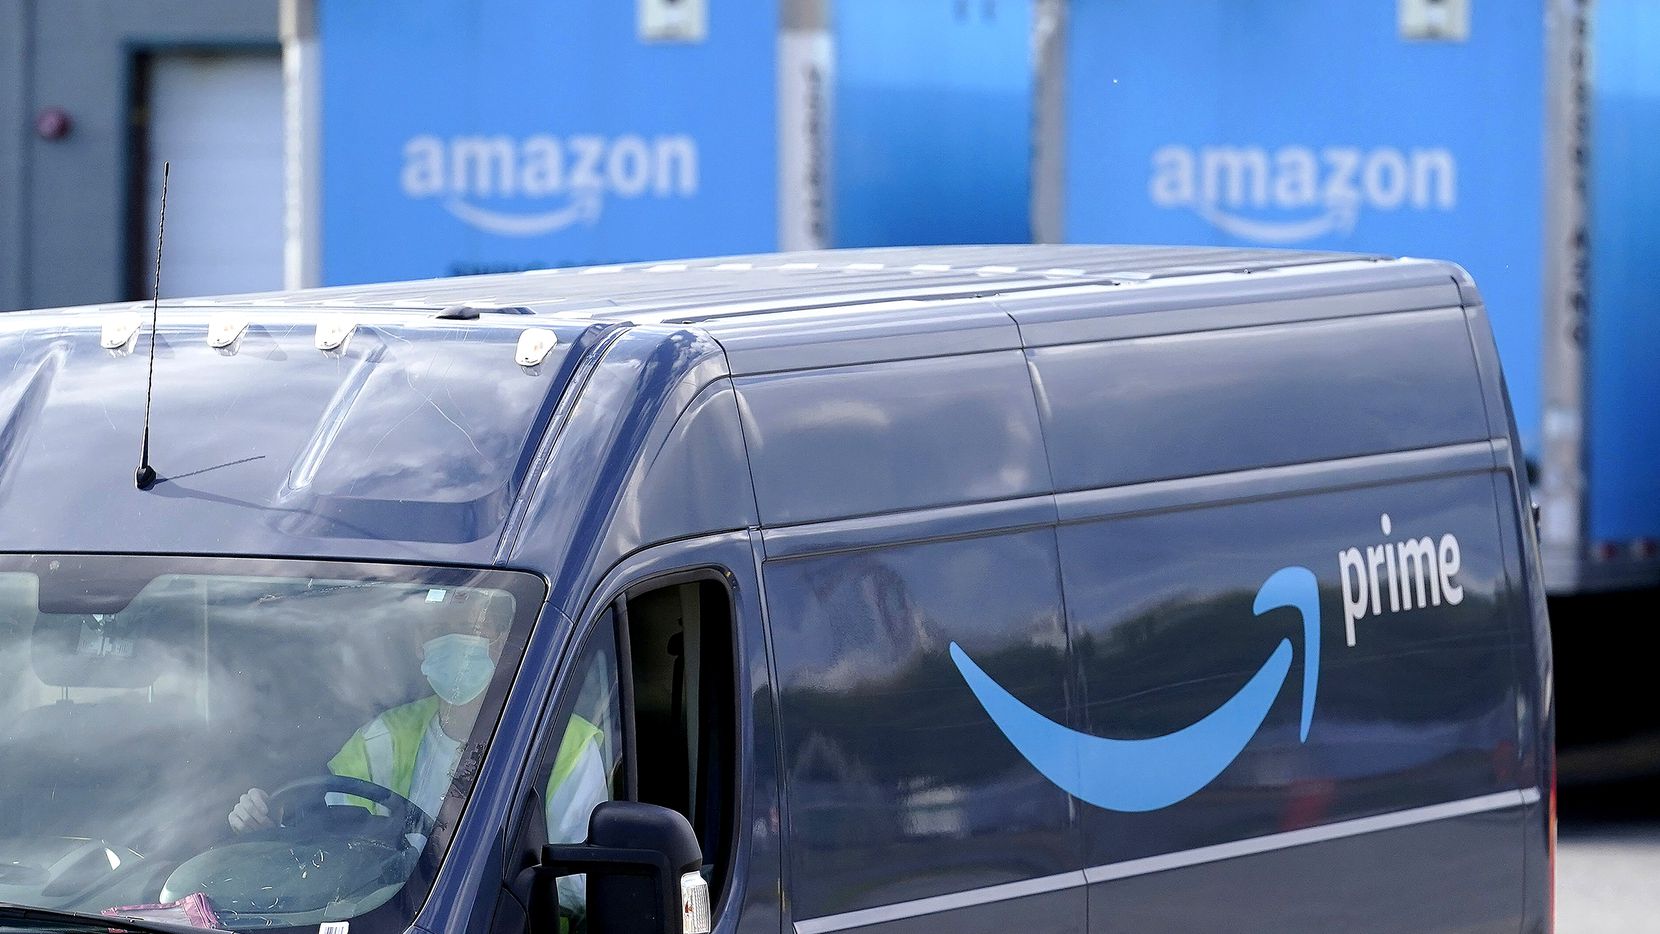 FILE - In this Oct. 1, 2020 file photo, an Amazon Prime logo appears on the side of a delivery van as it departs an Amazon Warehouse location in Dedham, Mass.  Online shopping has been a lifeline for many as the virus pandemic shuttered stores and kept people at home. The COVID-19 pandemic has accelerated the change in how people shop in a world growing more comfortable and savvier with technology.  (AP Photo/Steven Senne, File)